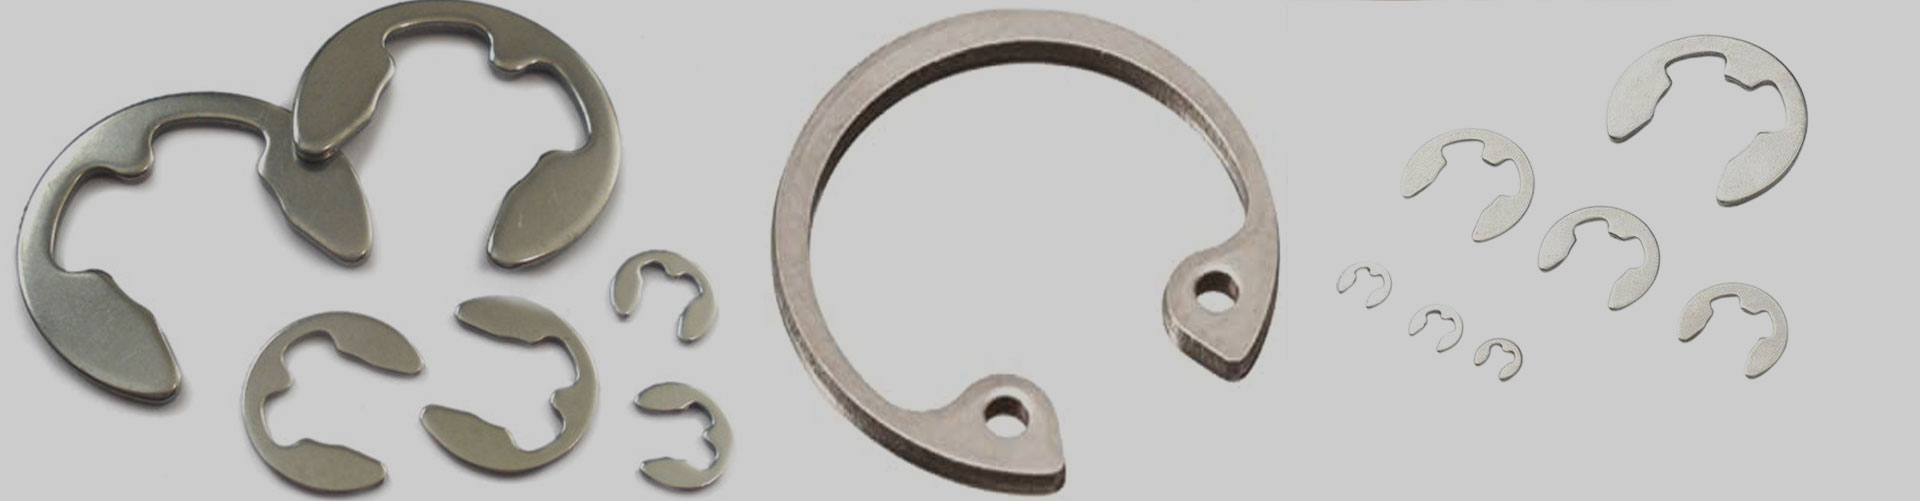 Stainless Steel C Clips